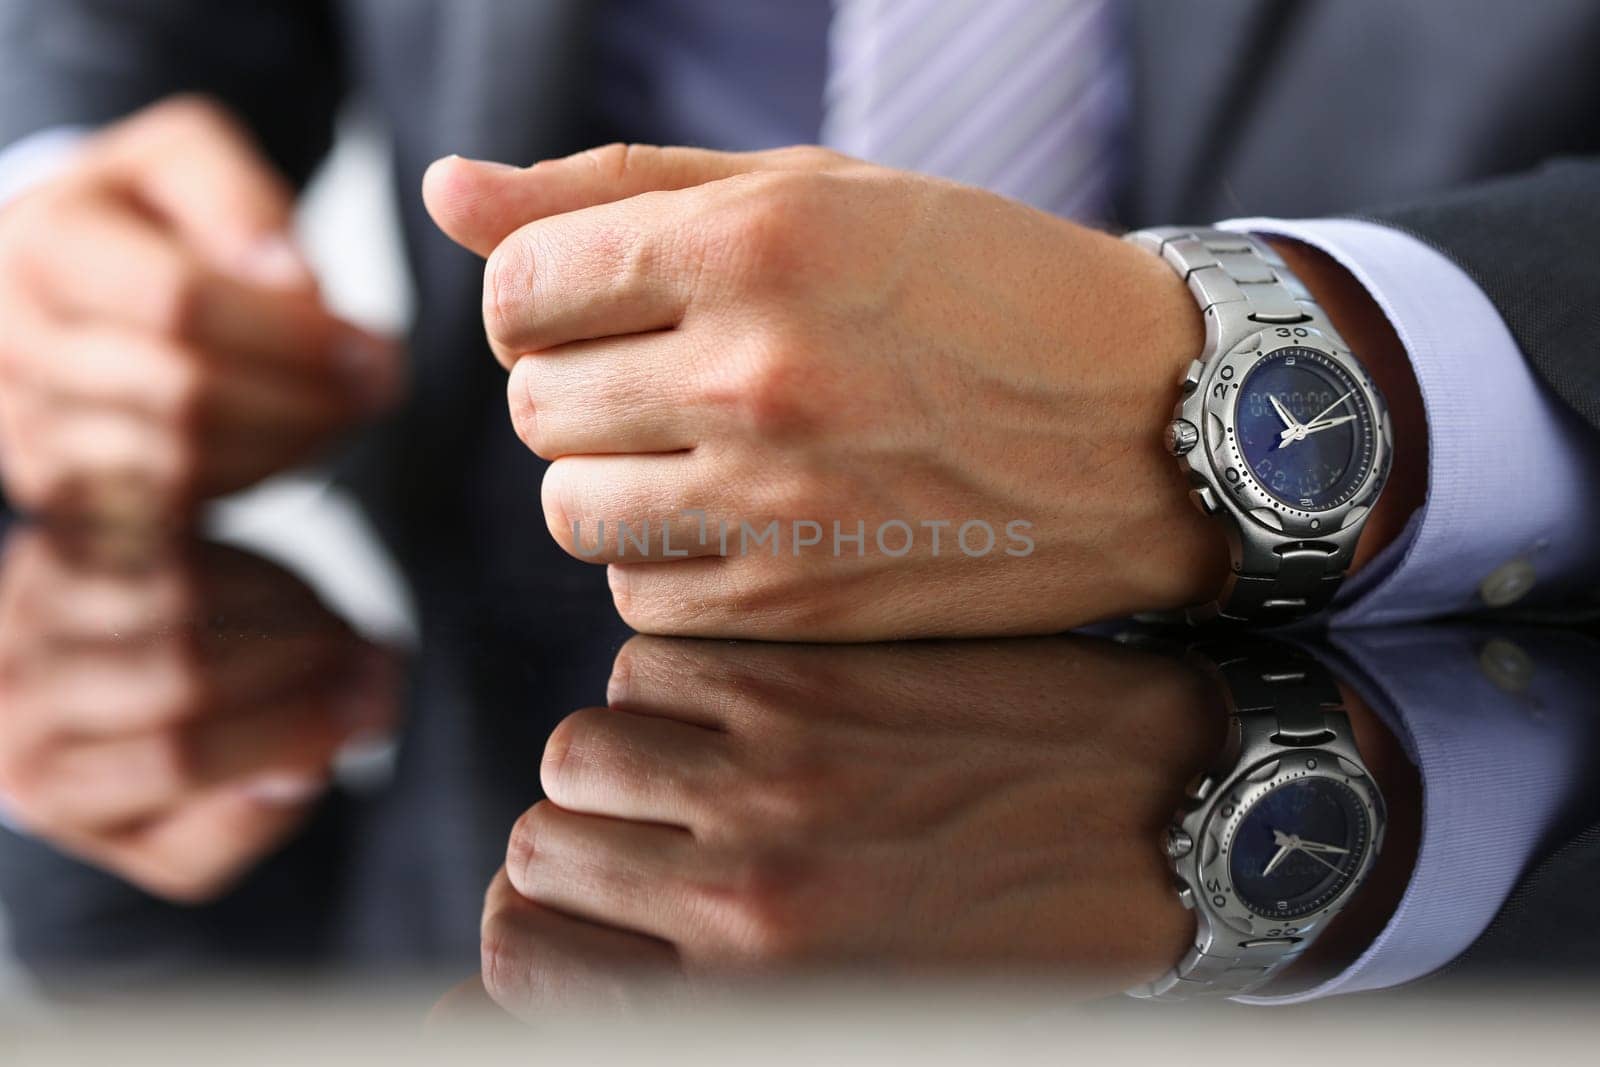 Man in suit and tie check out time at silver wristwatch closeup. Waste minute modern punctual life style start hurry job idea last second clockwork precision concept